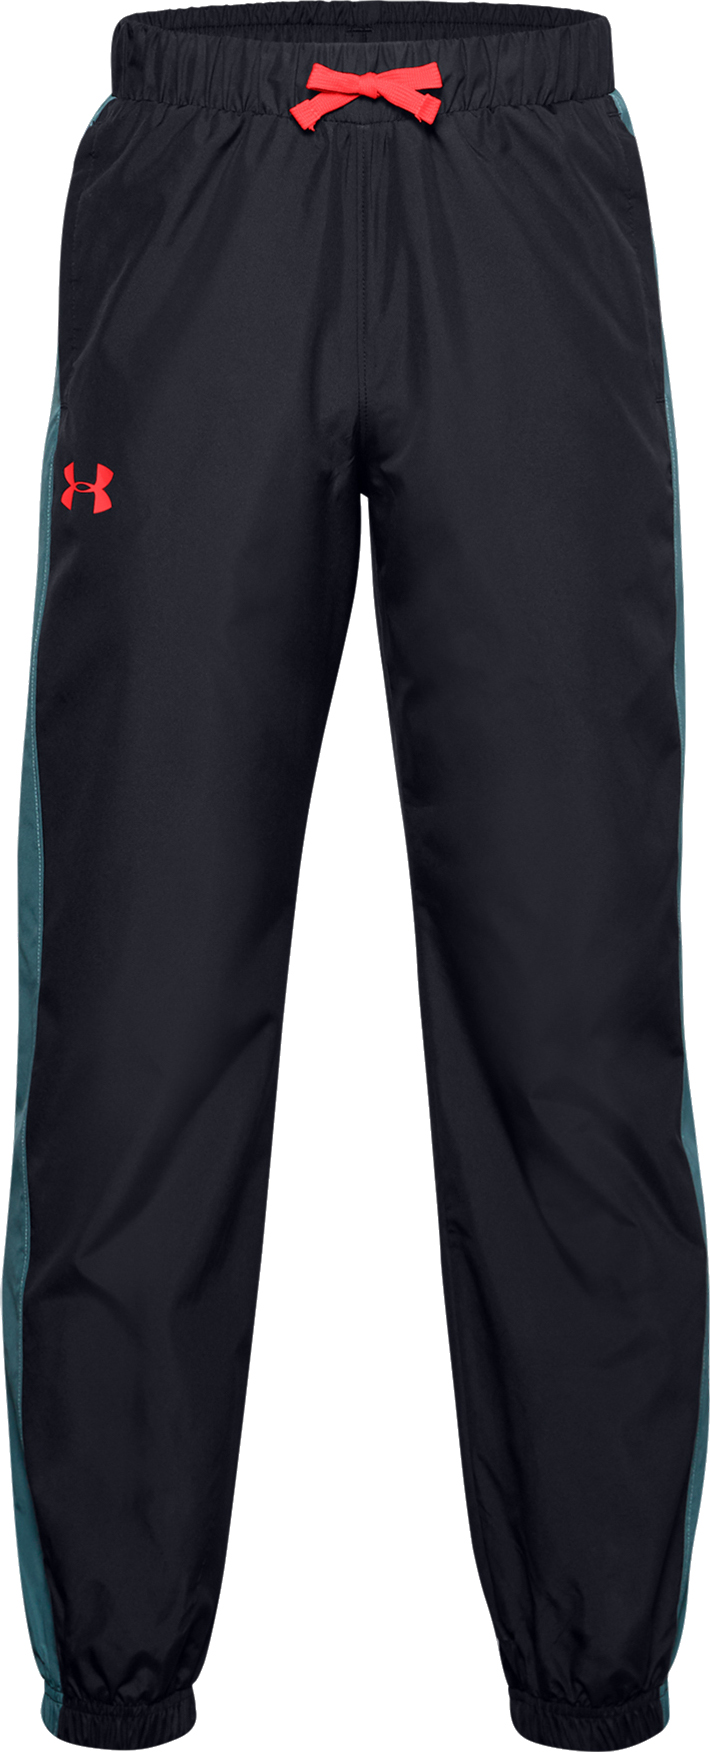 Under Armour UA Mesh Lined Pants